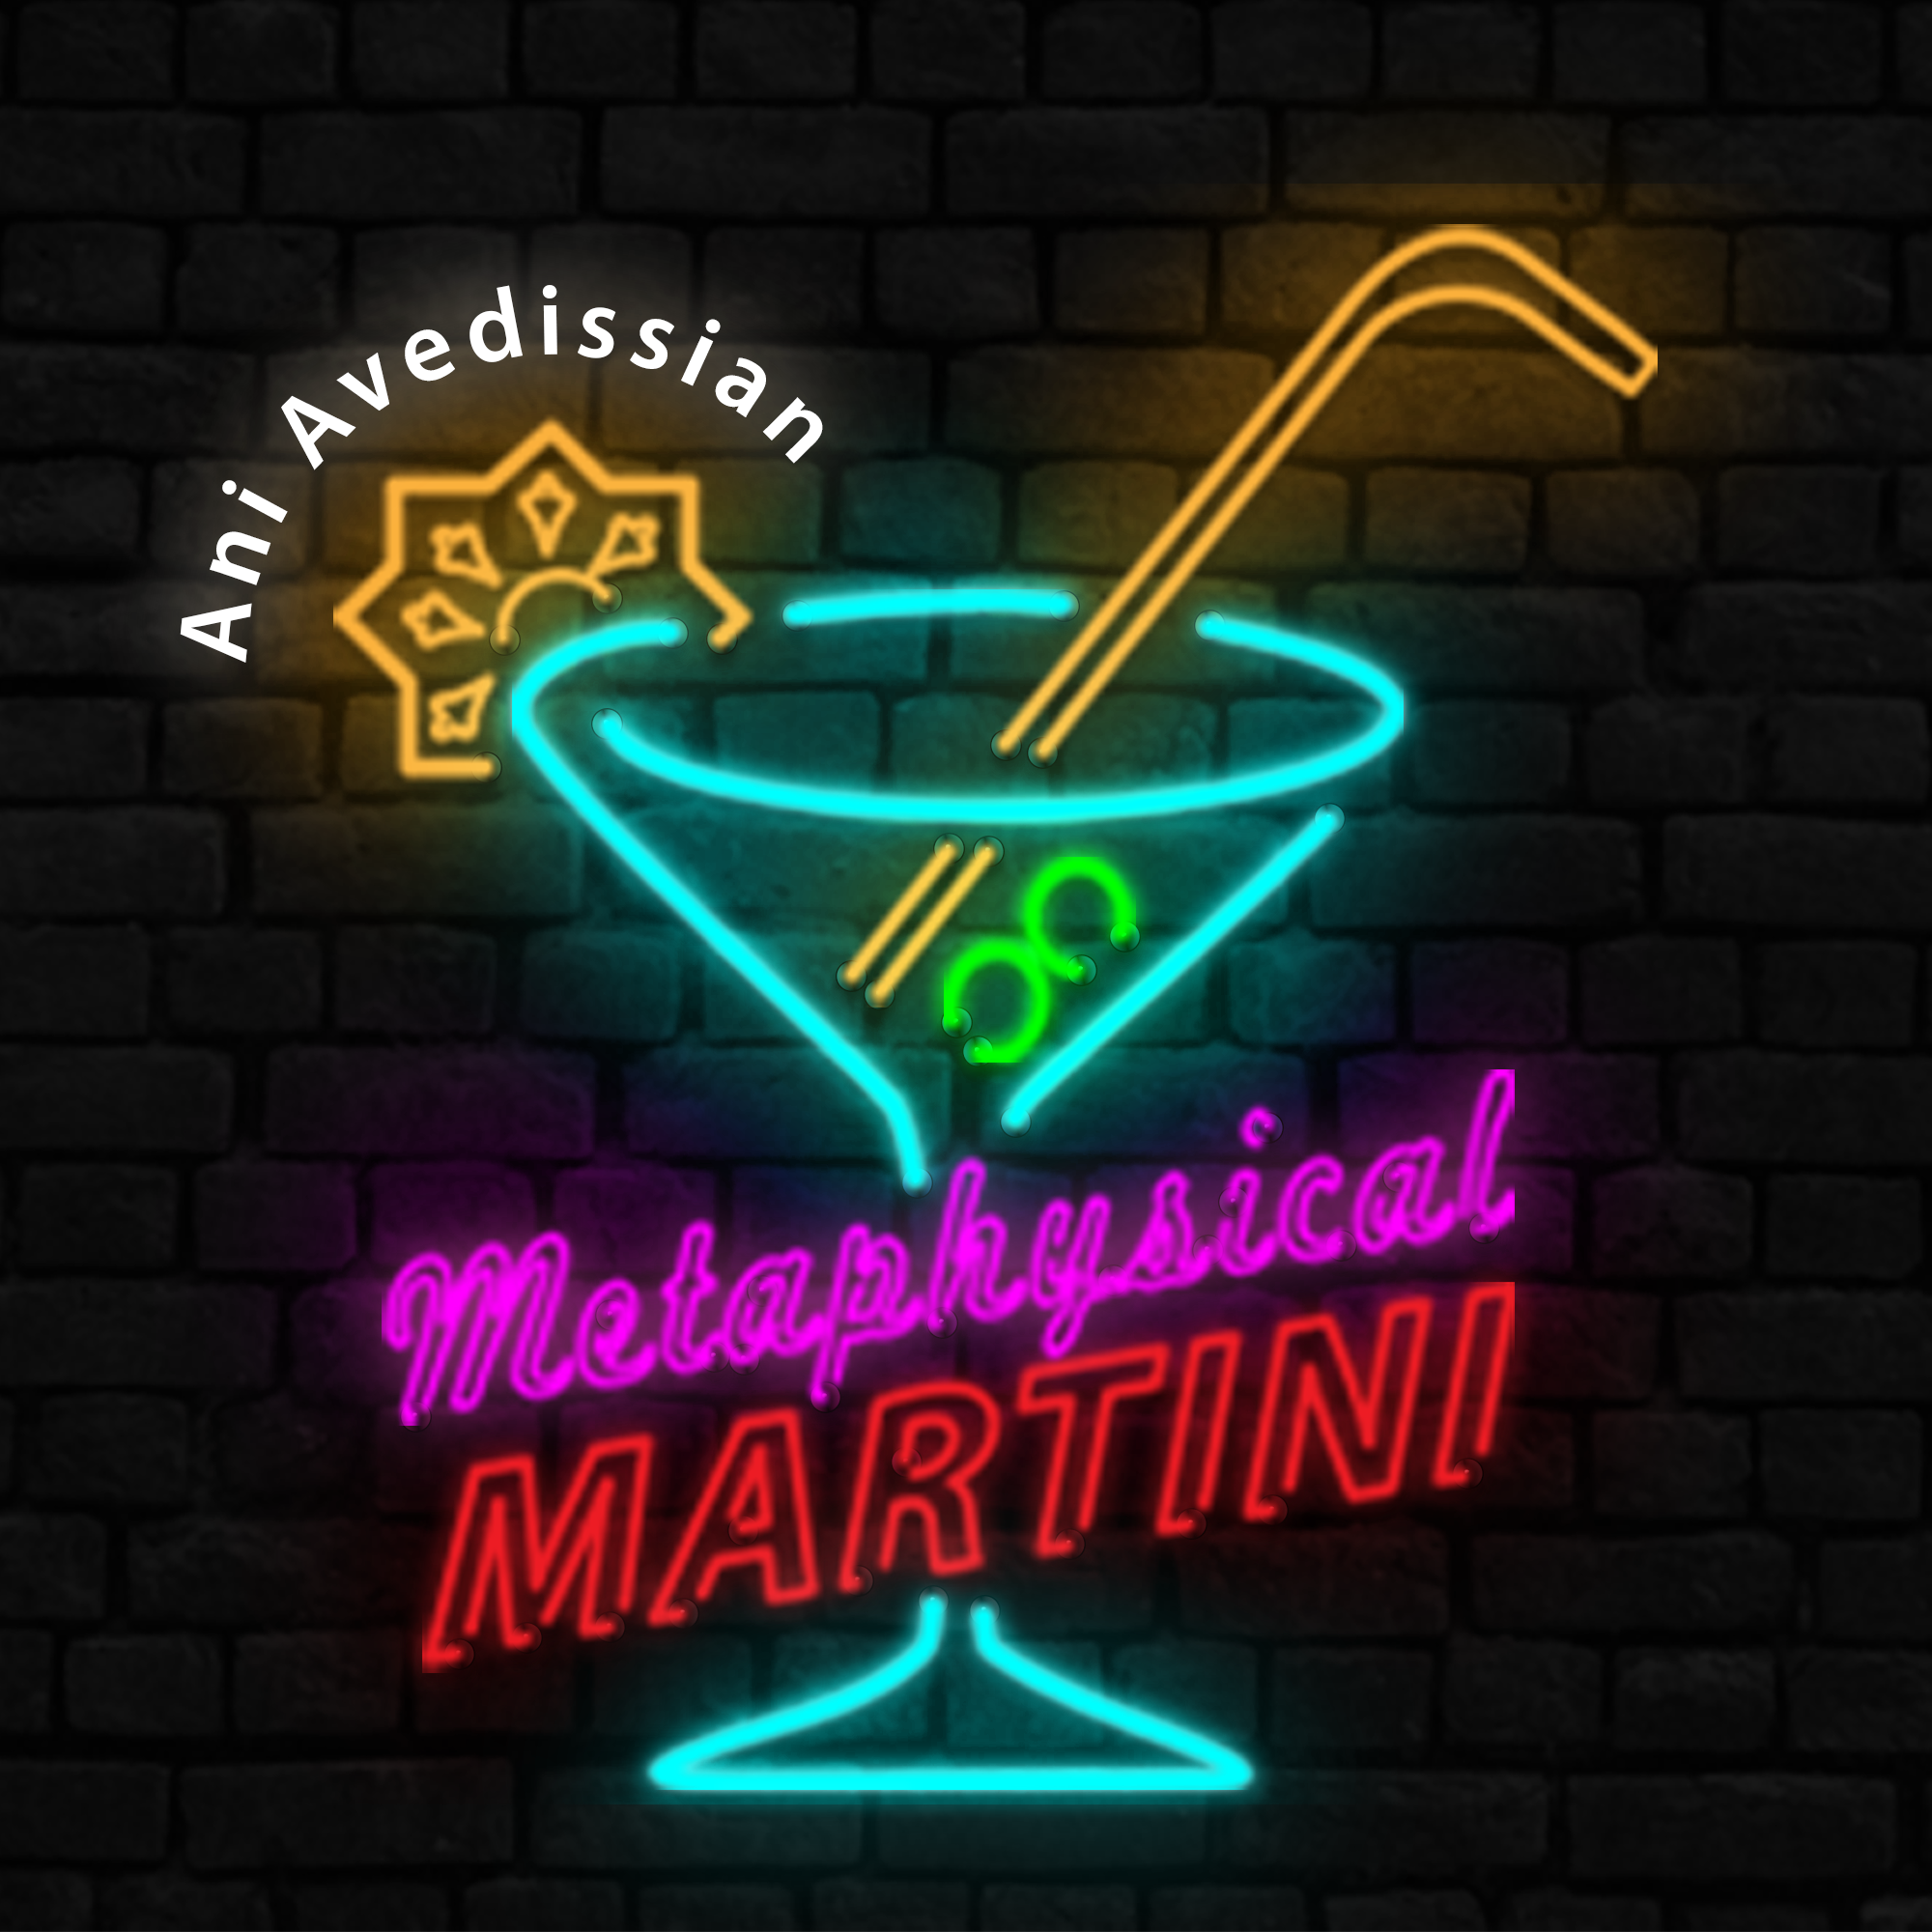 "Metaphysical Martini"   03/18/2020  The sovereign soul sees through the trolls.  Rise above the chaos!